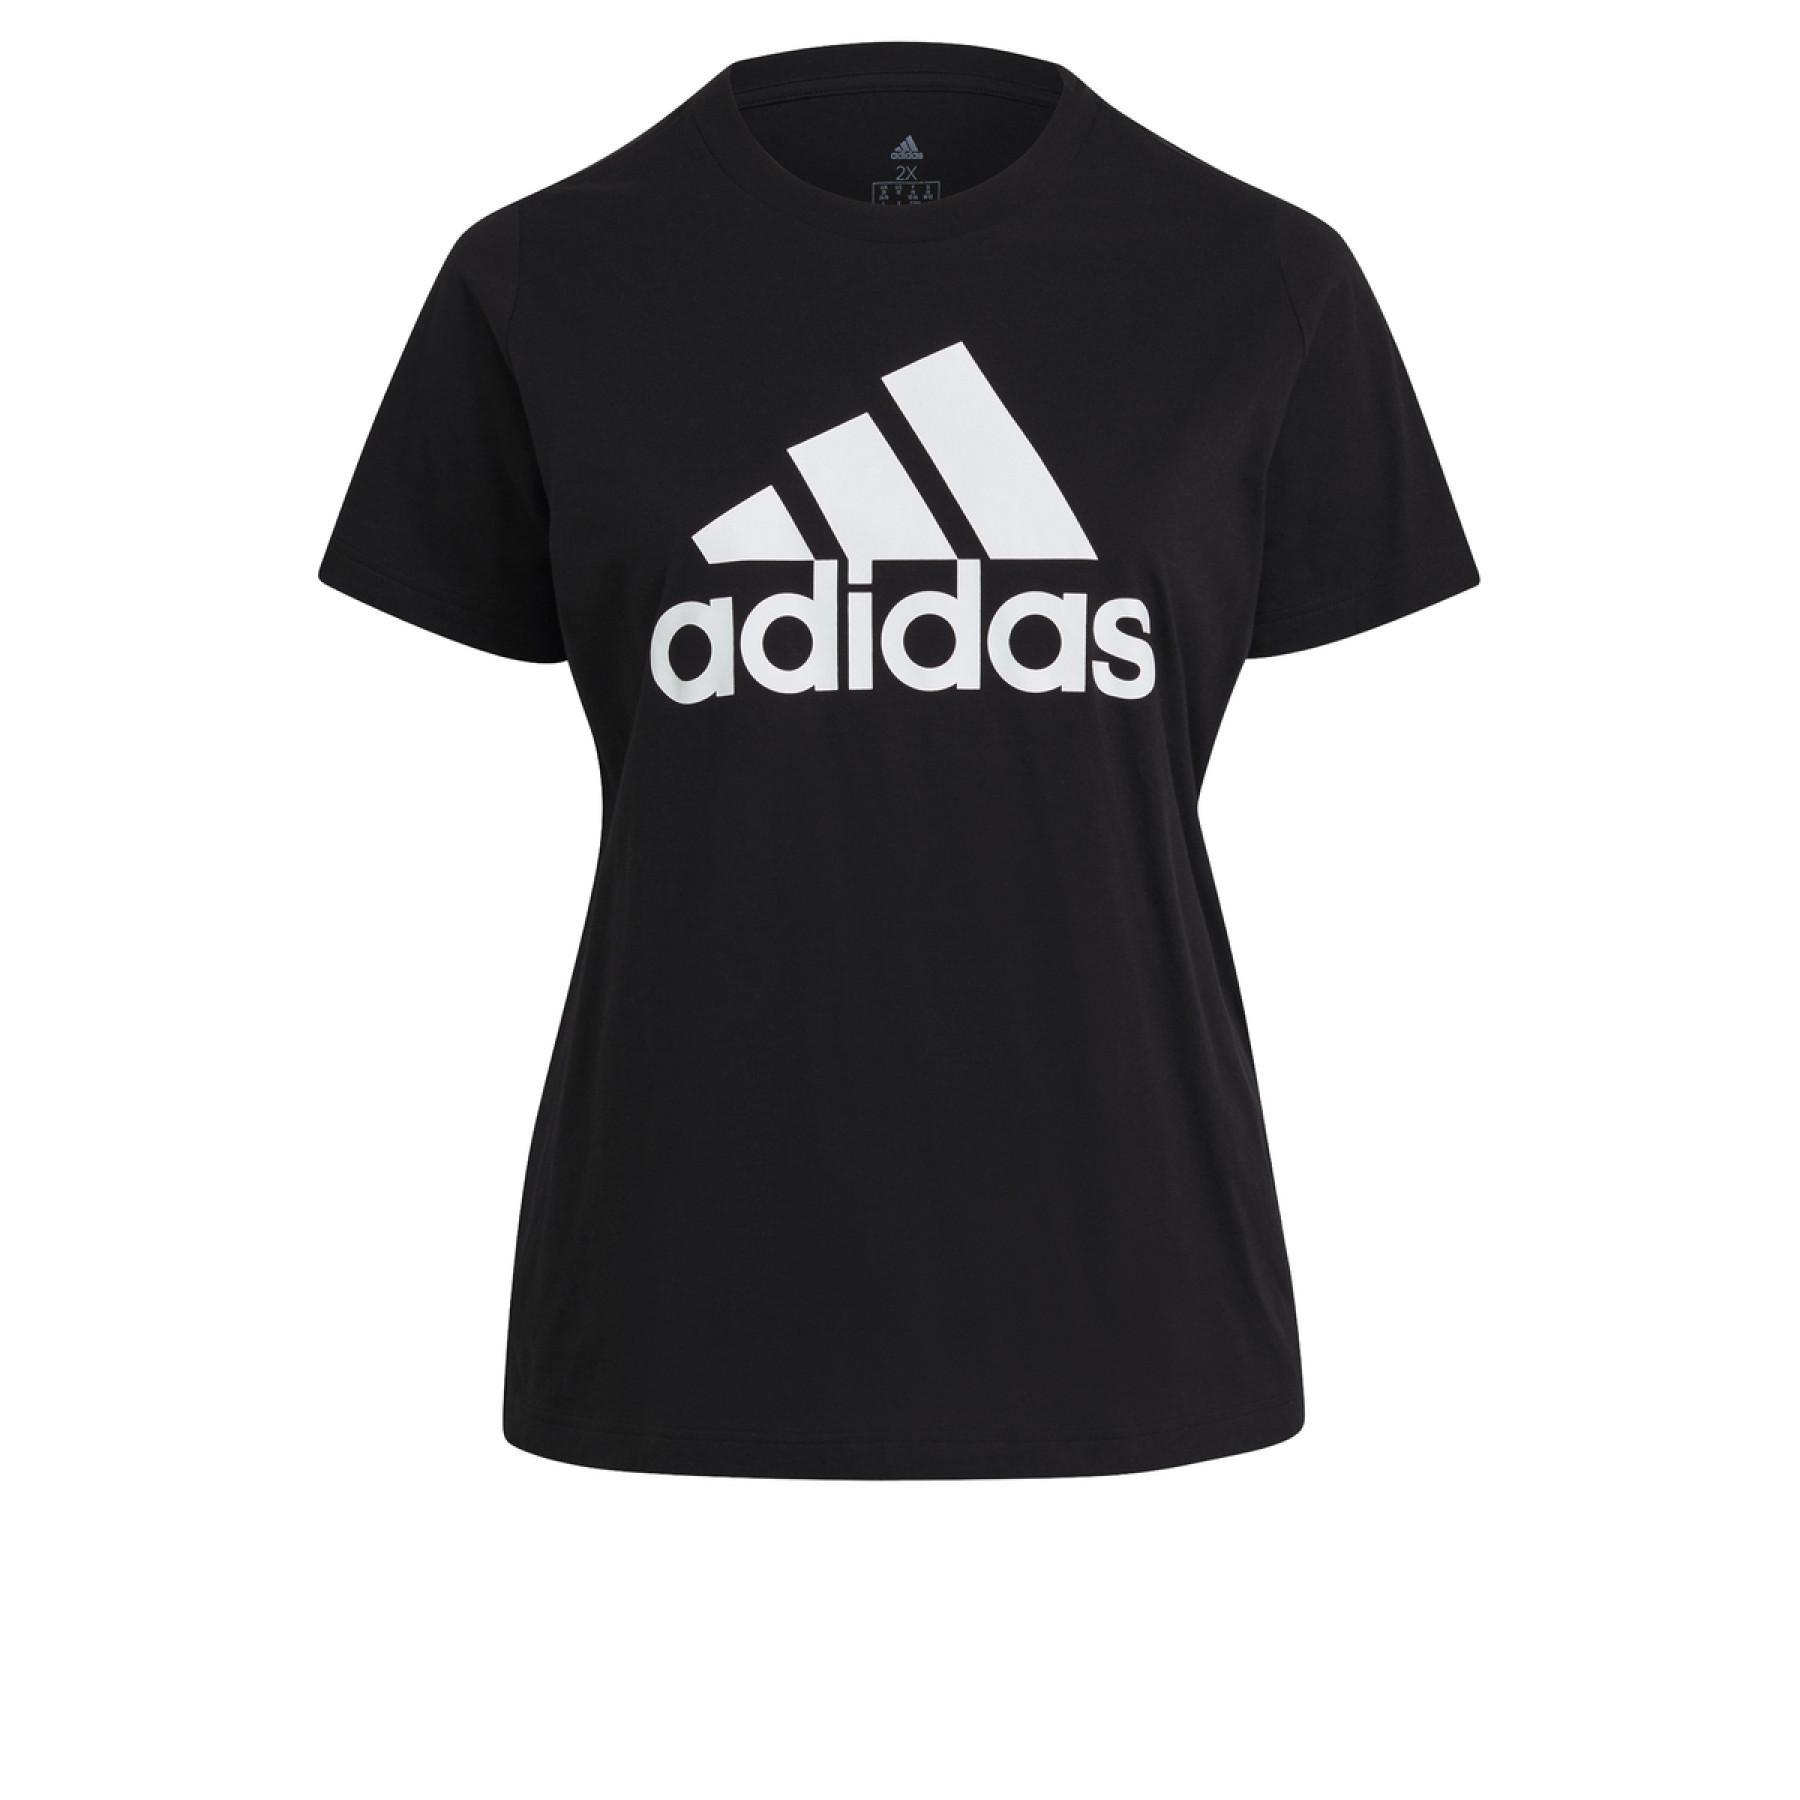 Frauen-T-Shirt adidas Must Haves Badge of Sport Grande Taille